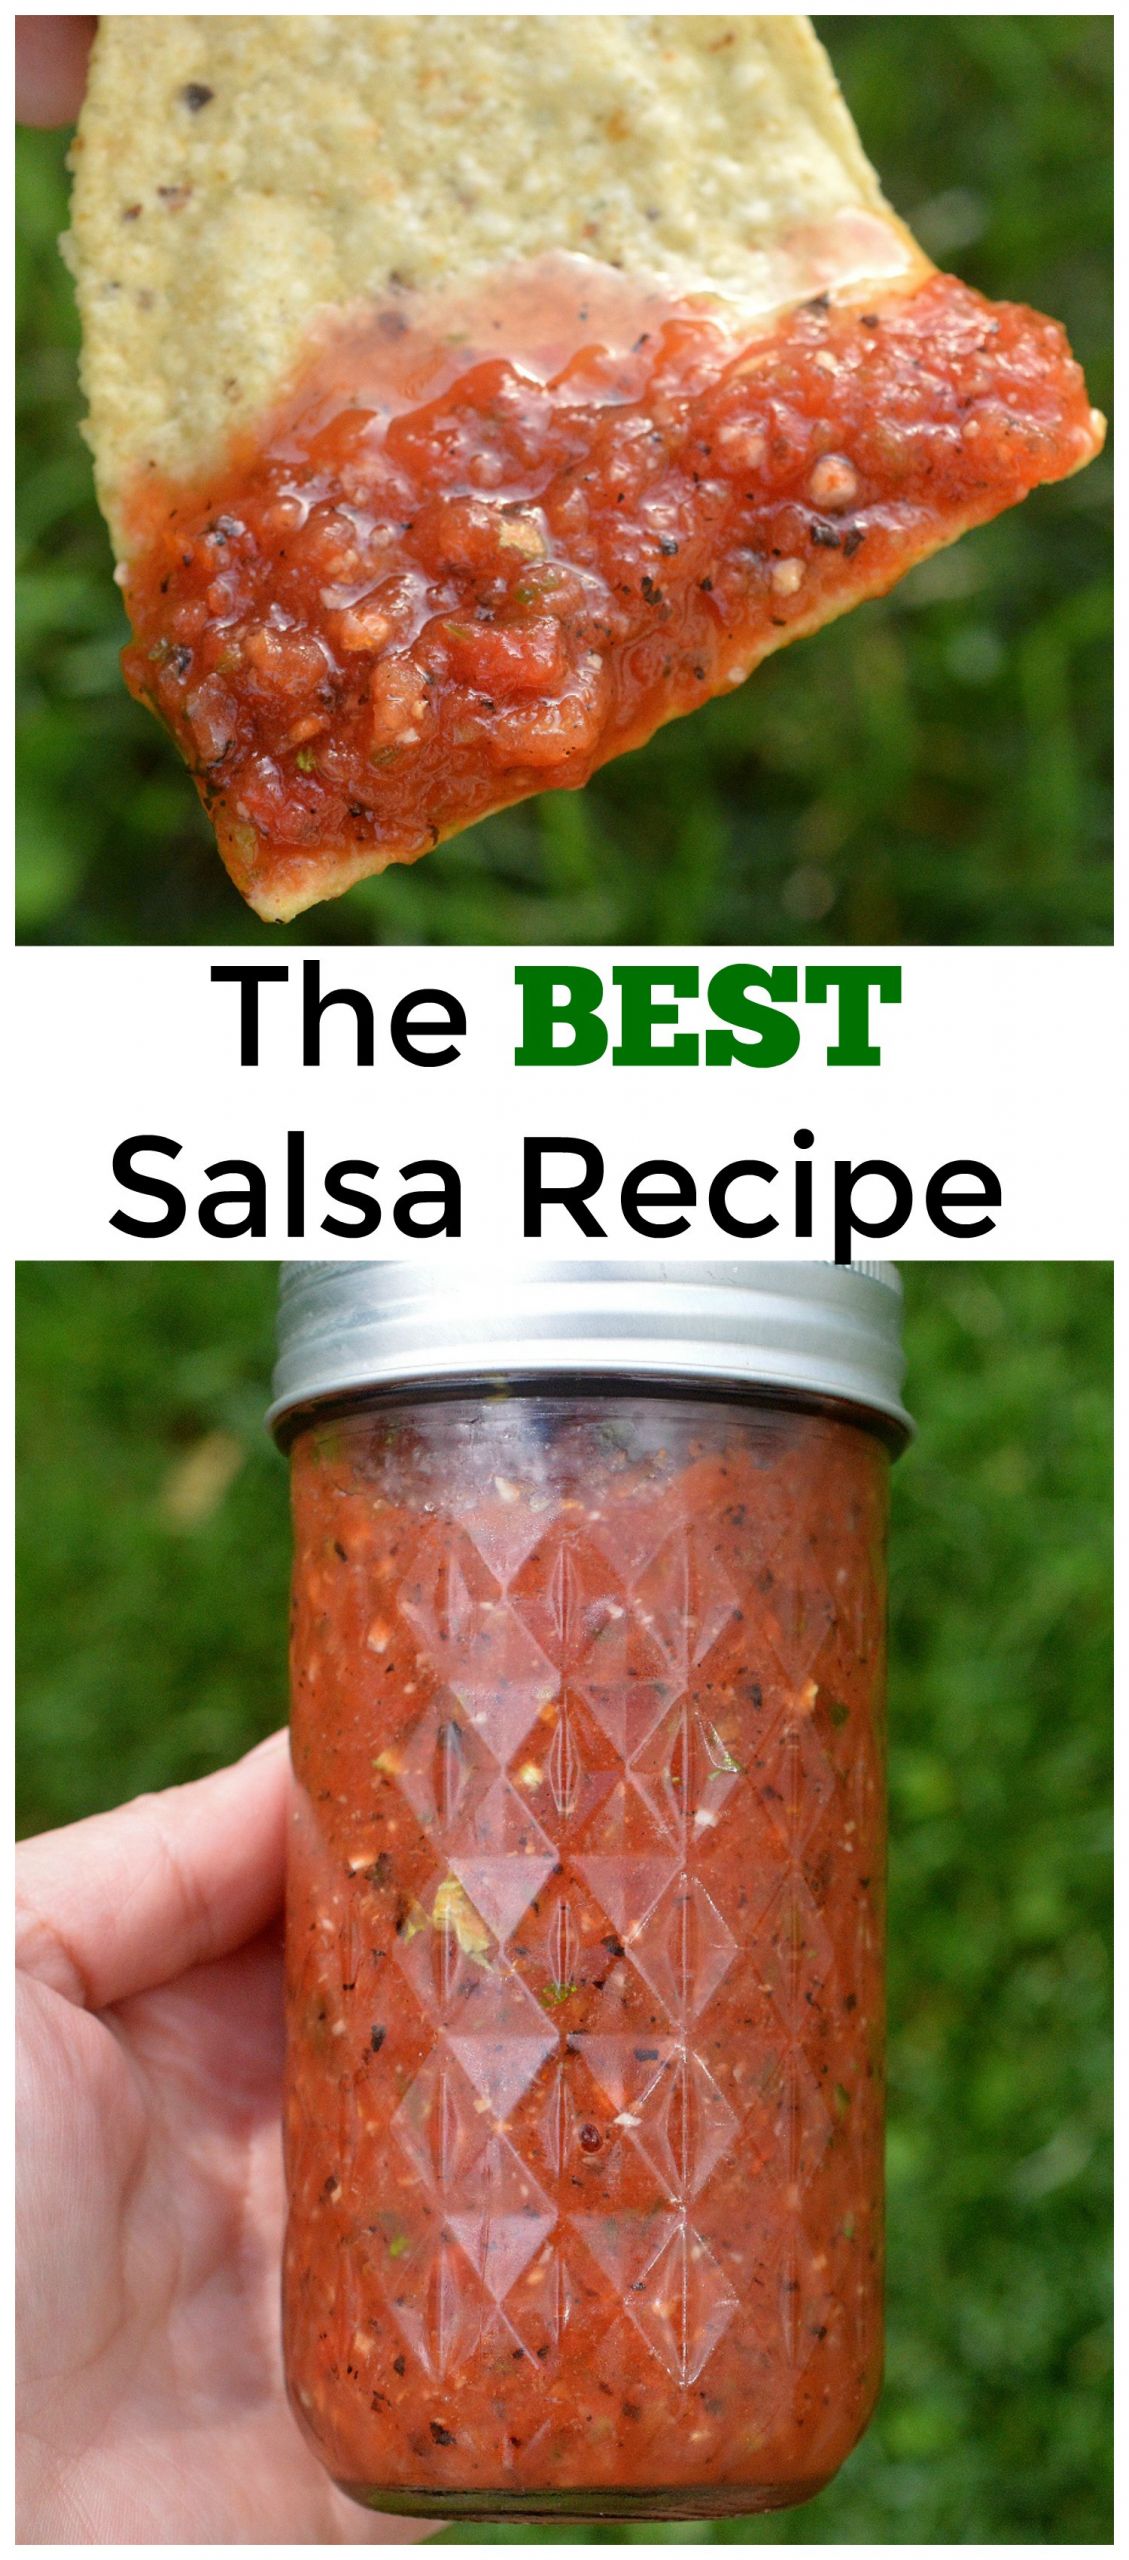 Good Salsa Recipe
 The BEST and Easiest Salsa Recipe